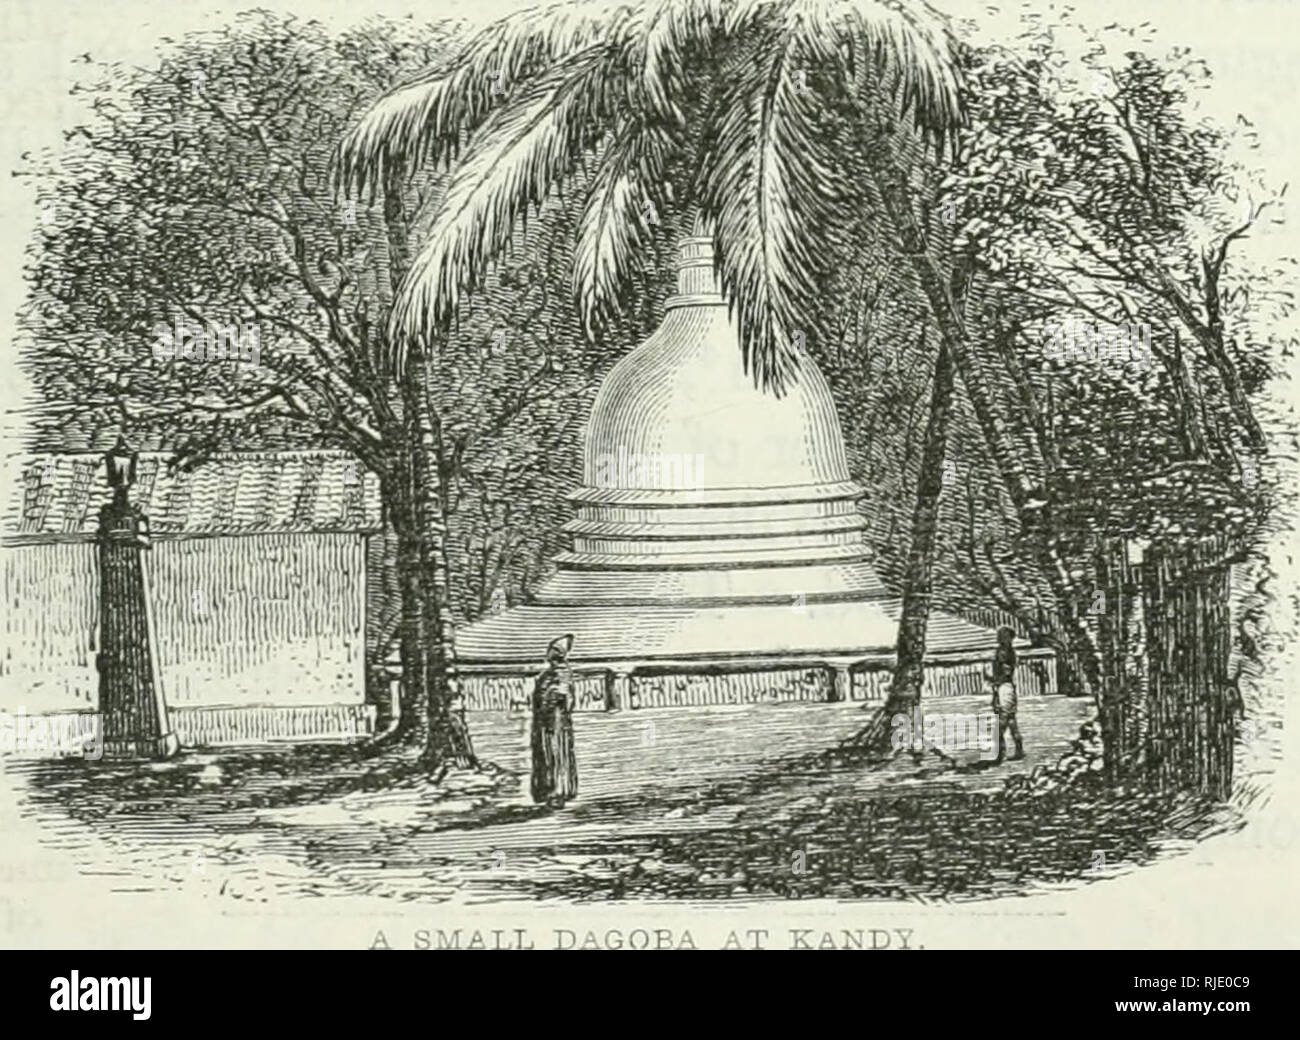 . Ceylon : an account of the island, physical, historical, and topographical with notices of its natural history, antiquities and productions. Natural history. CuAP. IV.] THE EARLY BUDDHIST MONUMENTS. 345 A dagoba (from datu^ a relic, and gabbhan, a shrine^) b.c. is a monument raised to preserve one of the relics of 289. Gotama, which were collected after the cremation of his body at Kusinara, and it is candidly admitted in the Mahawanso that the intention in erecting them was to provide &quot; objects to wliich offerings could be made.&quot; ^ Ceylon contains but one class of these structures Stock Photo